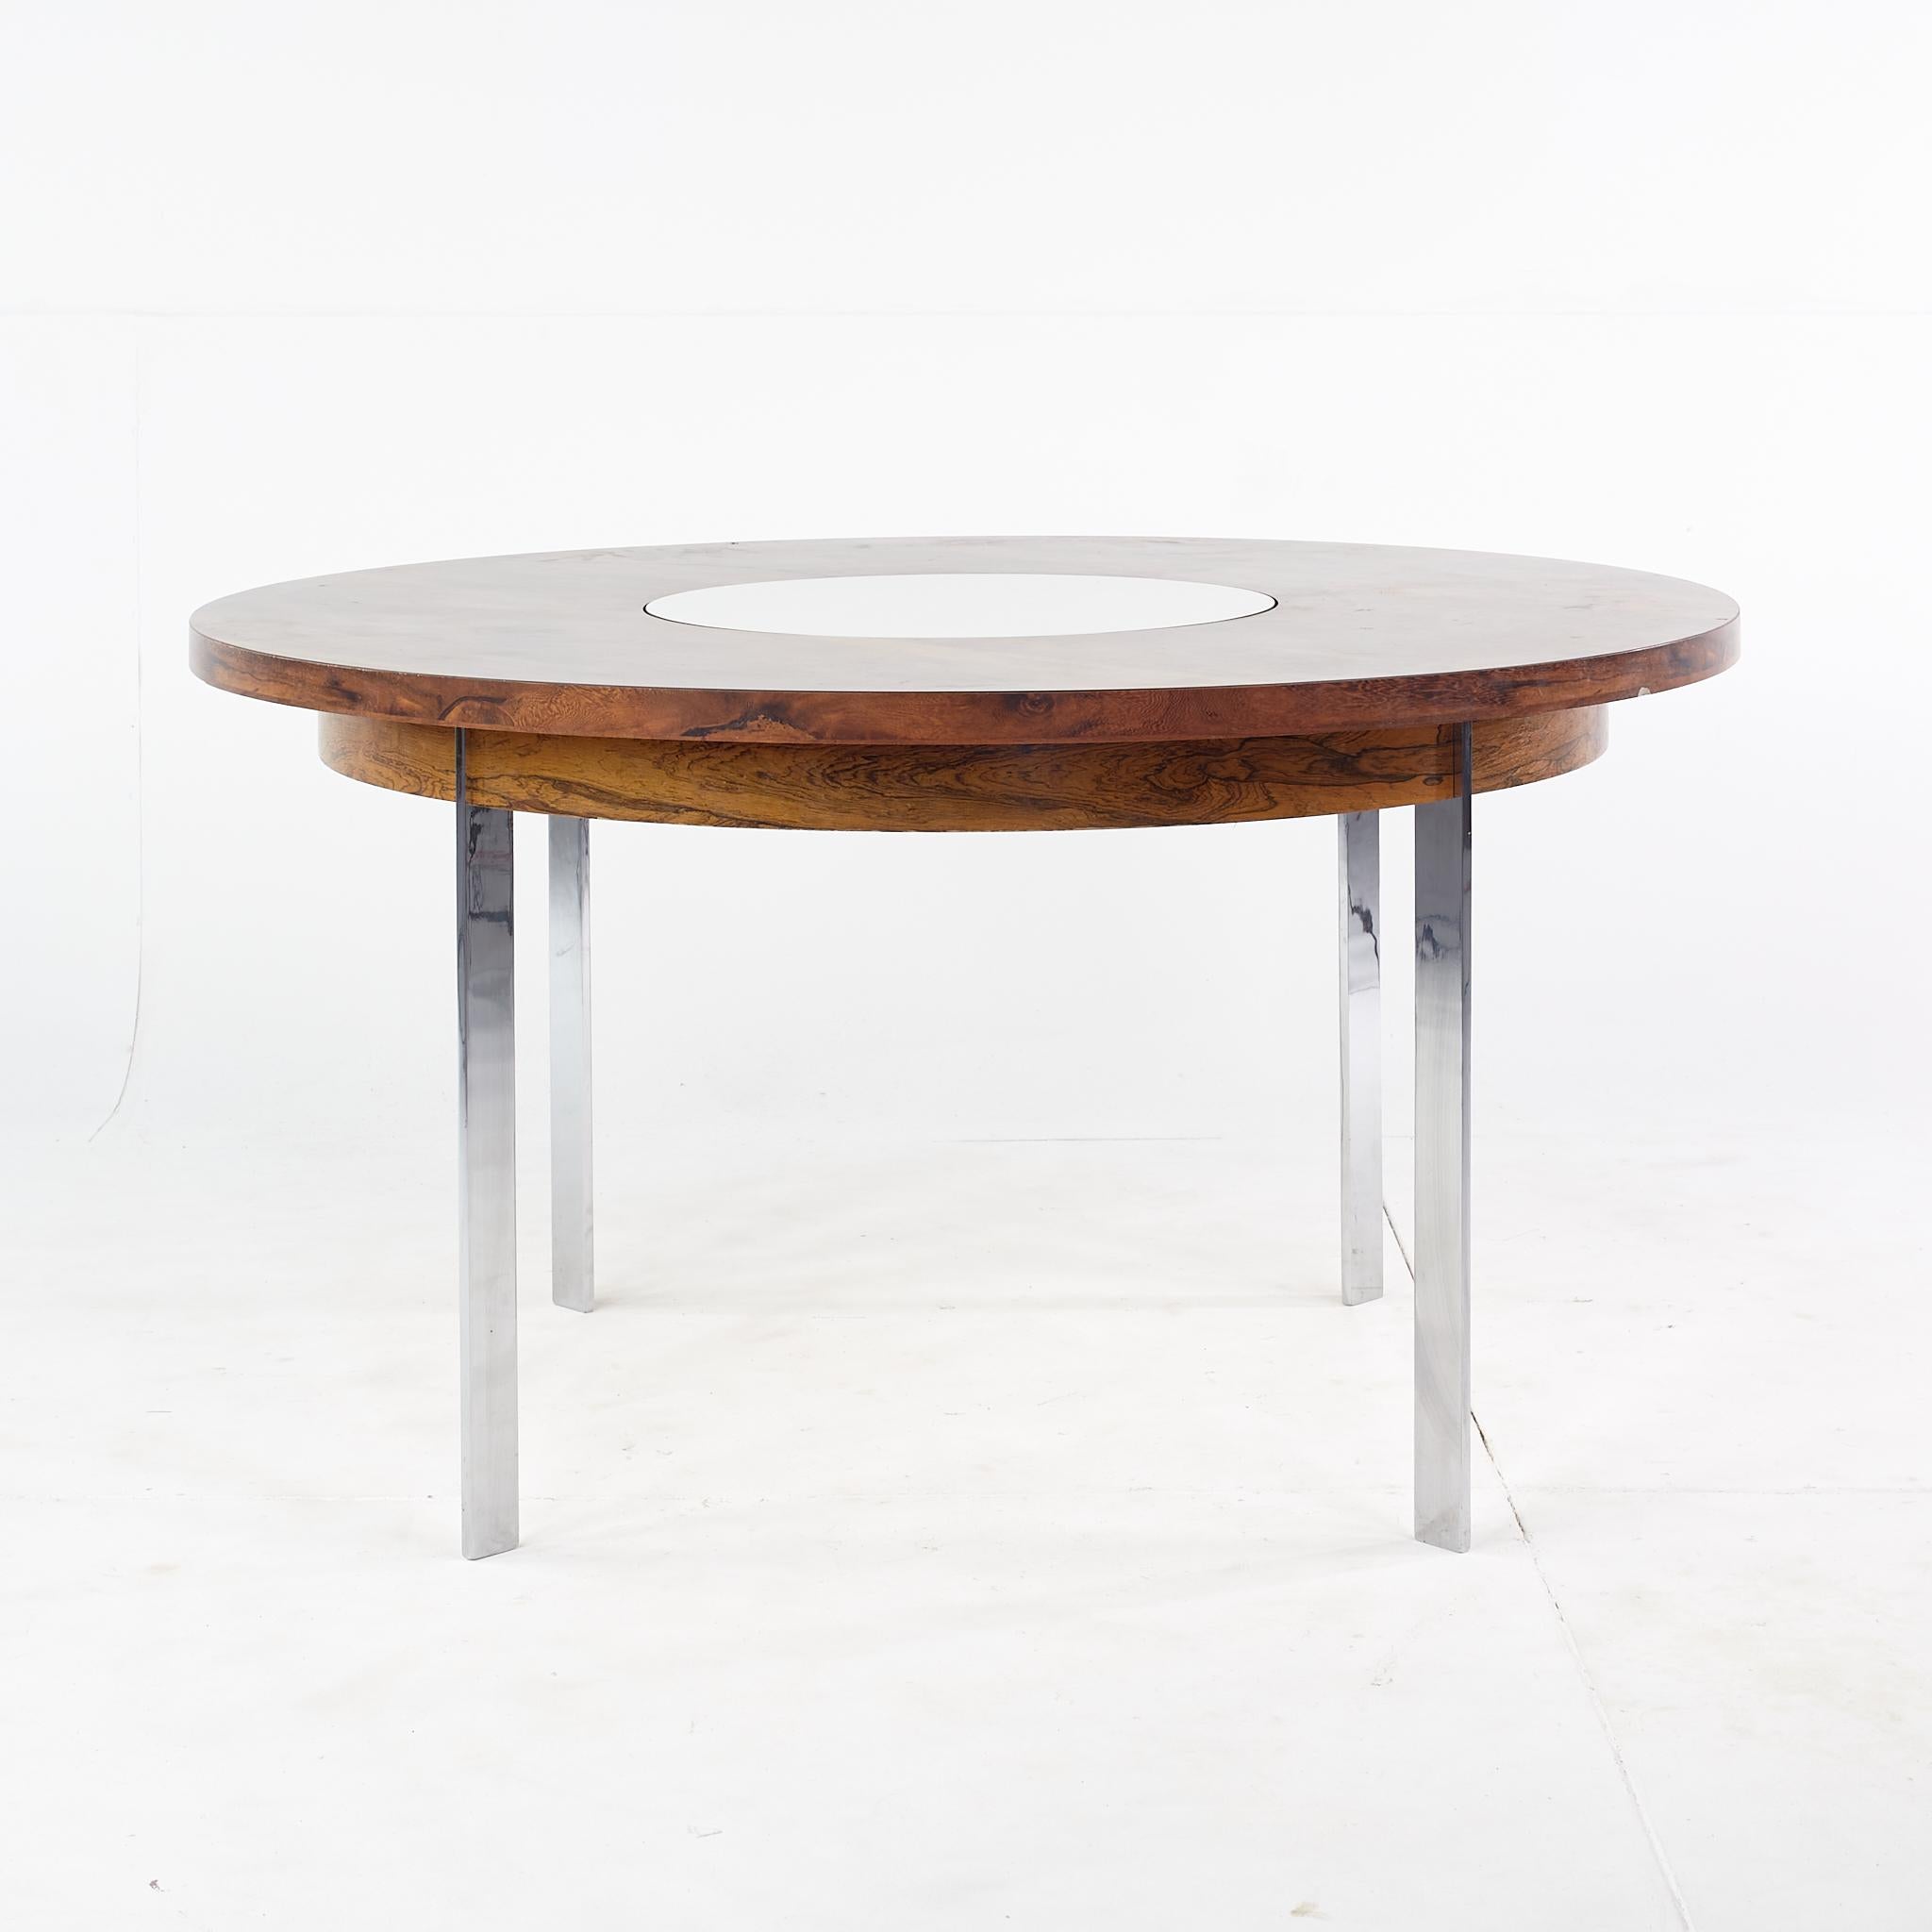 Richard Young mid century round rosewood lazy susan dining table

This dining table measures: 54 wide x 54 deep x 29 inches high, with chair clearance of 25 inches

All pieces of furniture can be had in what we call restored vintage condition.